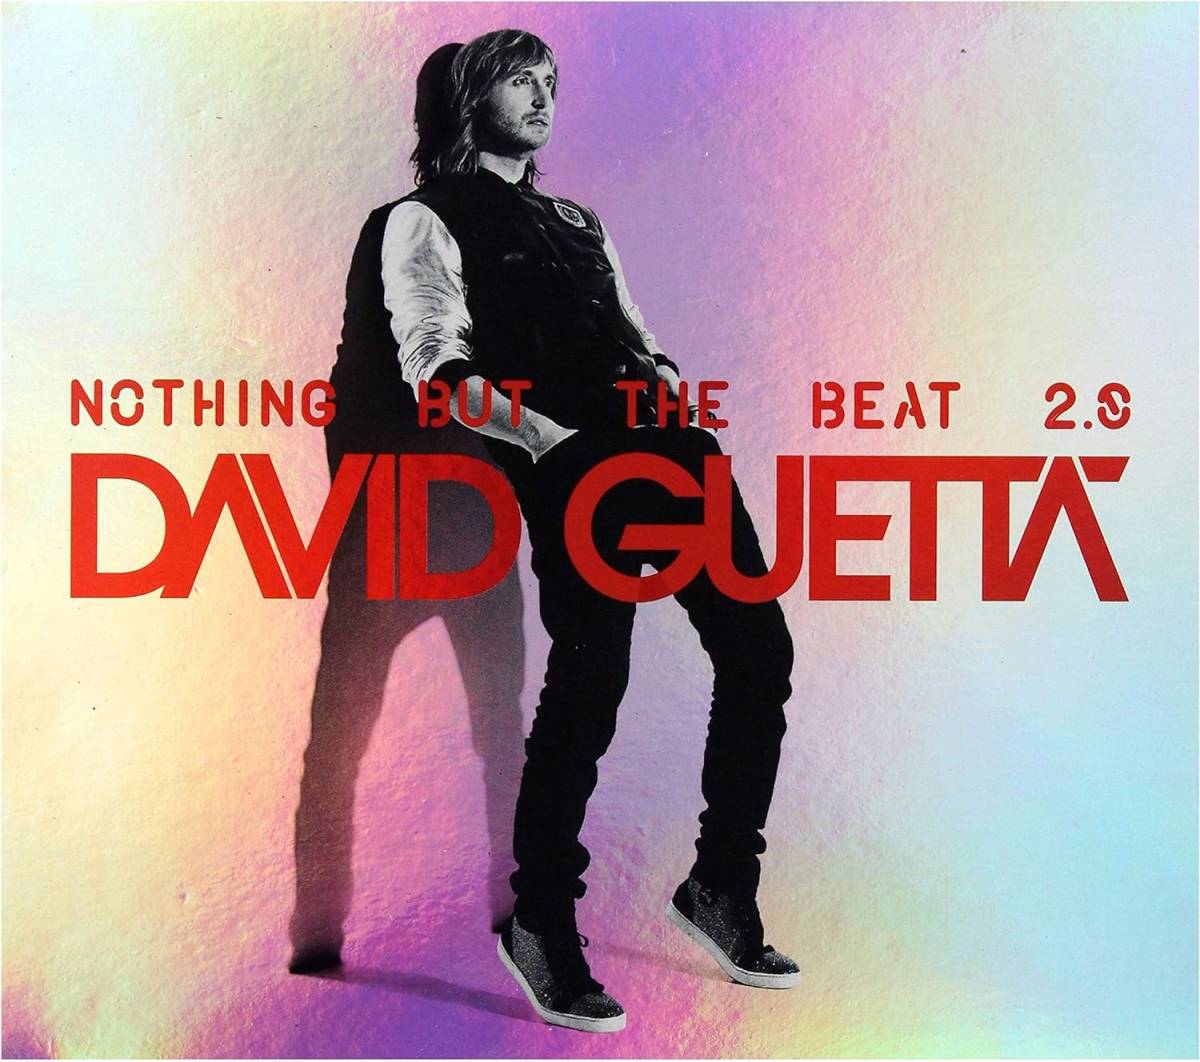 Nothing But the Beat 2.0 デヴィッド・ゲッタ 輸入盤CD_画像1